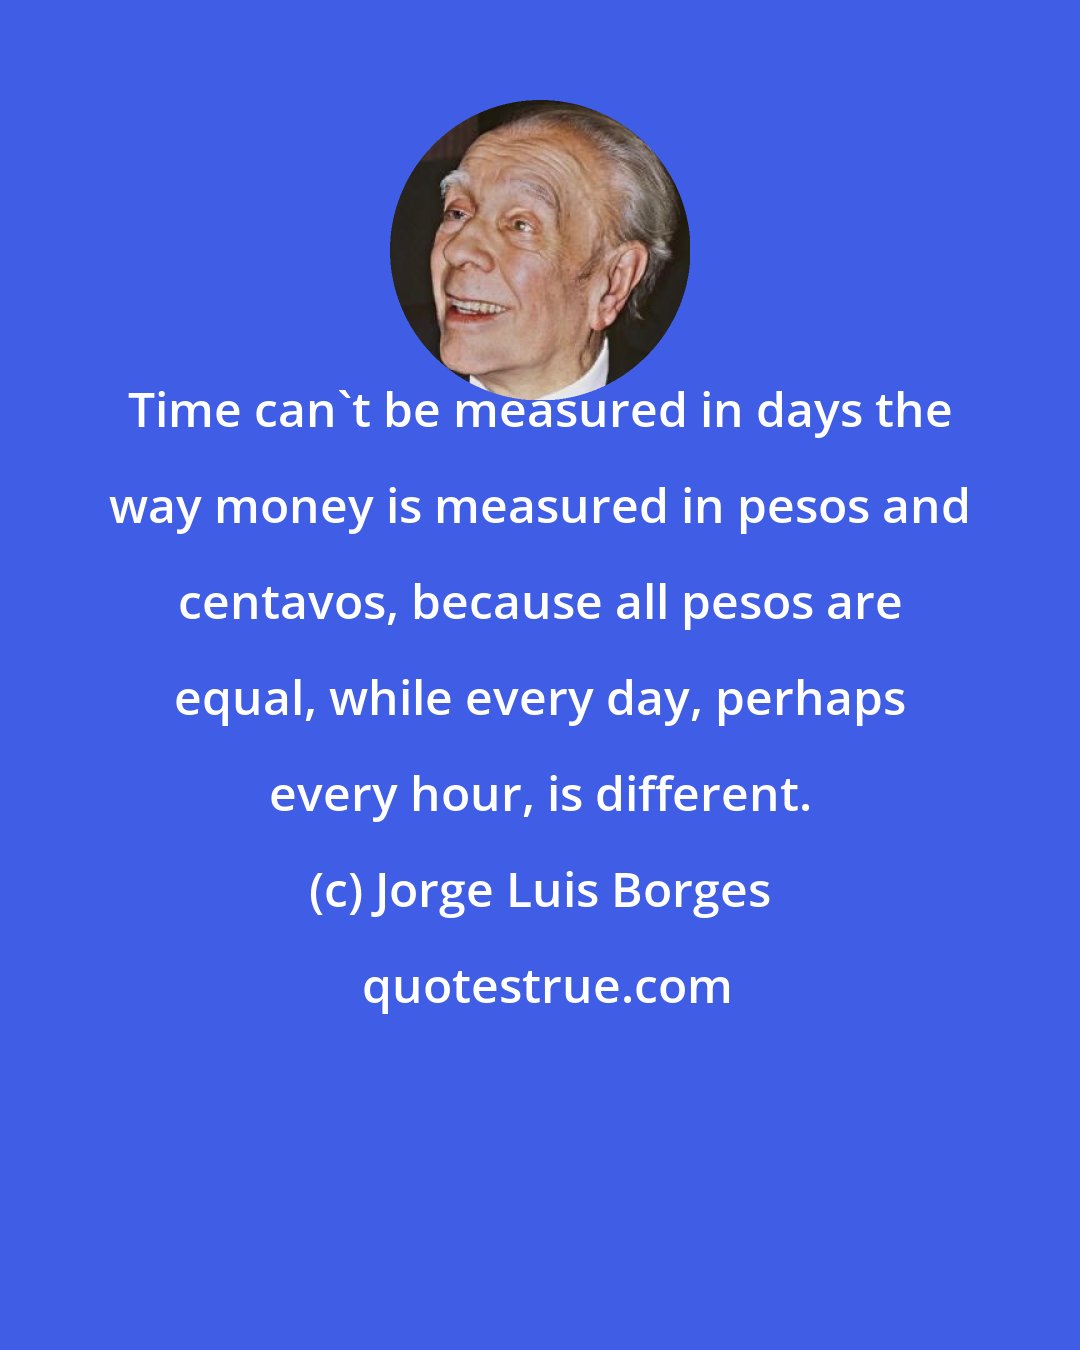 Jorge Luis Borges: Time can't be measured in days the way money is measured in pesos and centavos, because all pesos are equal, while every day, perhaps every hour, is different.